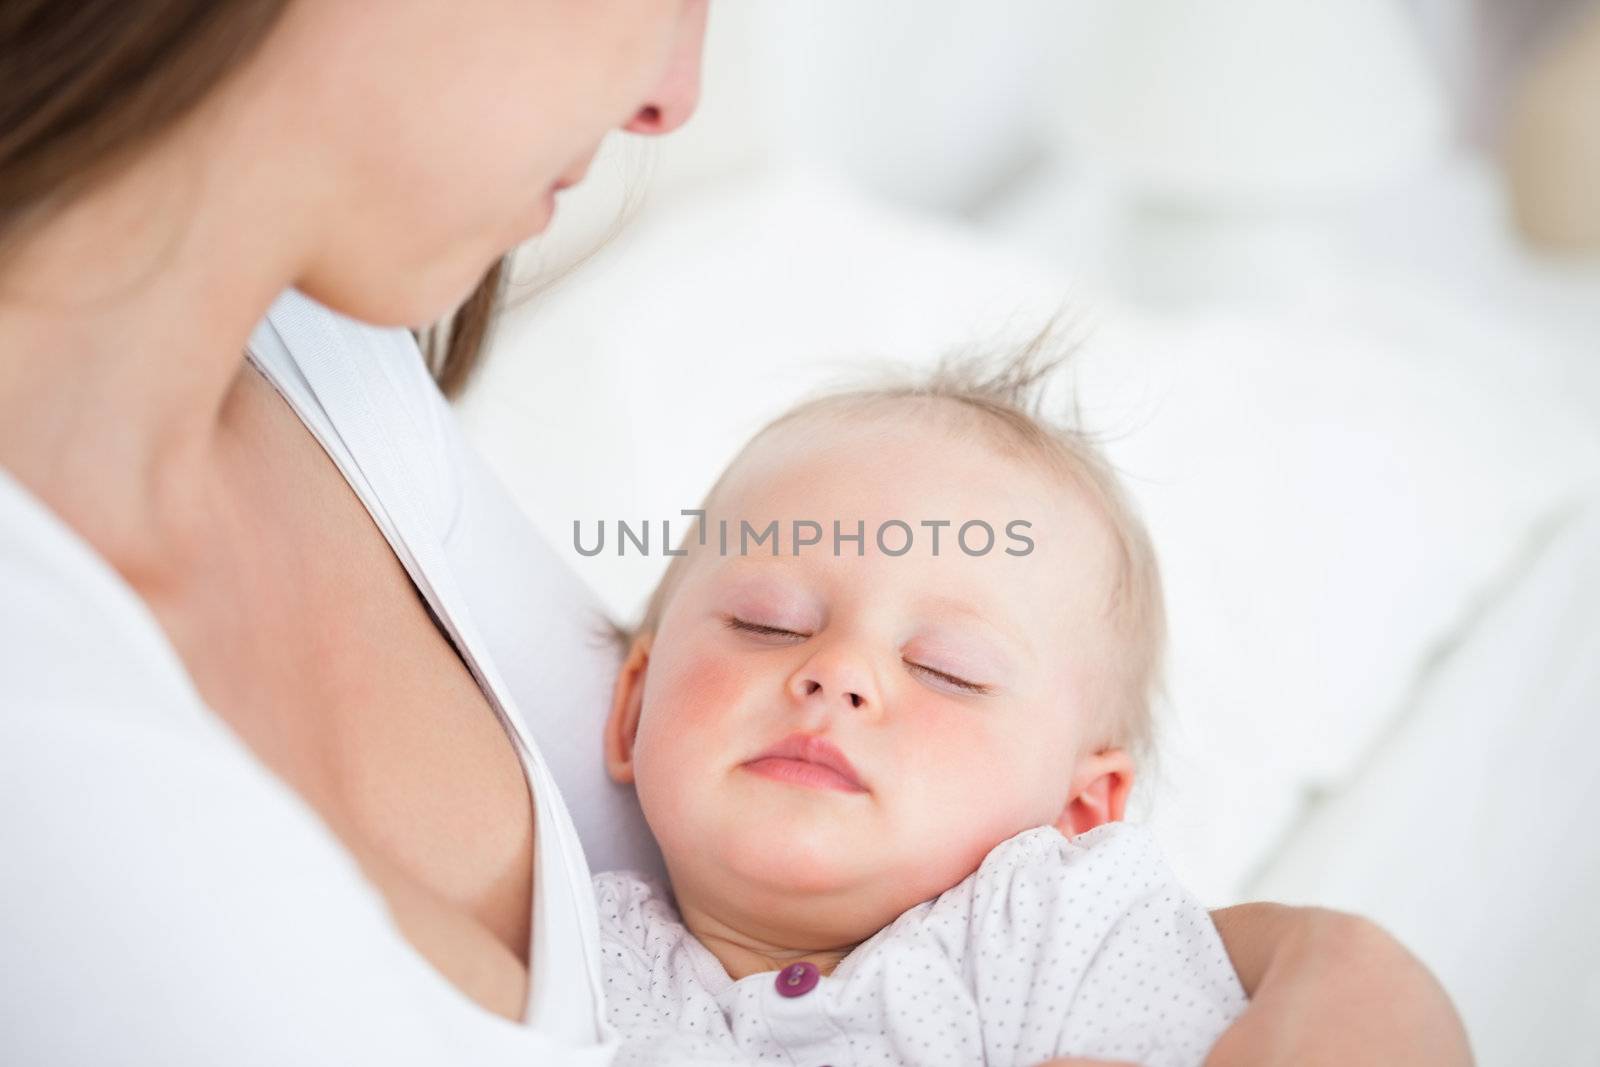 Baby falling asleep in the arms of her mother in a bedroom